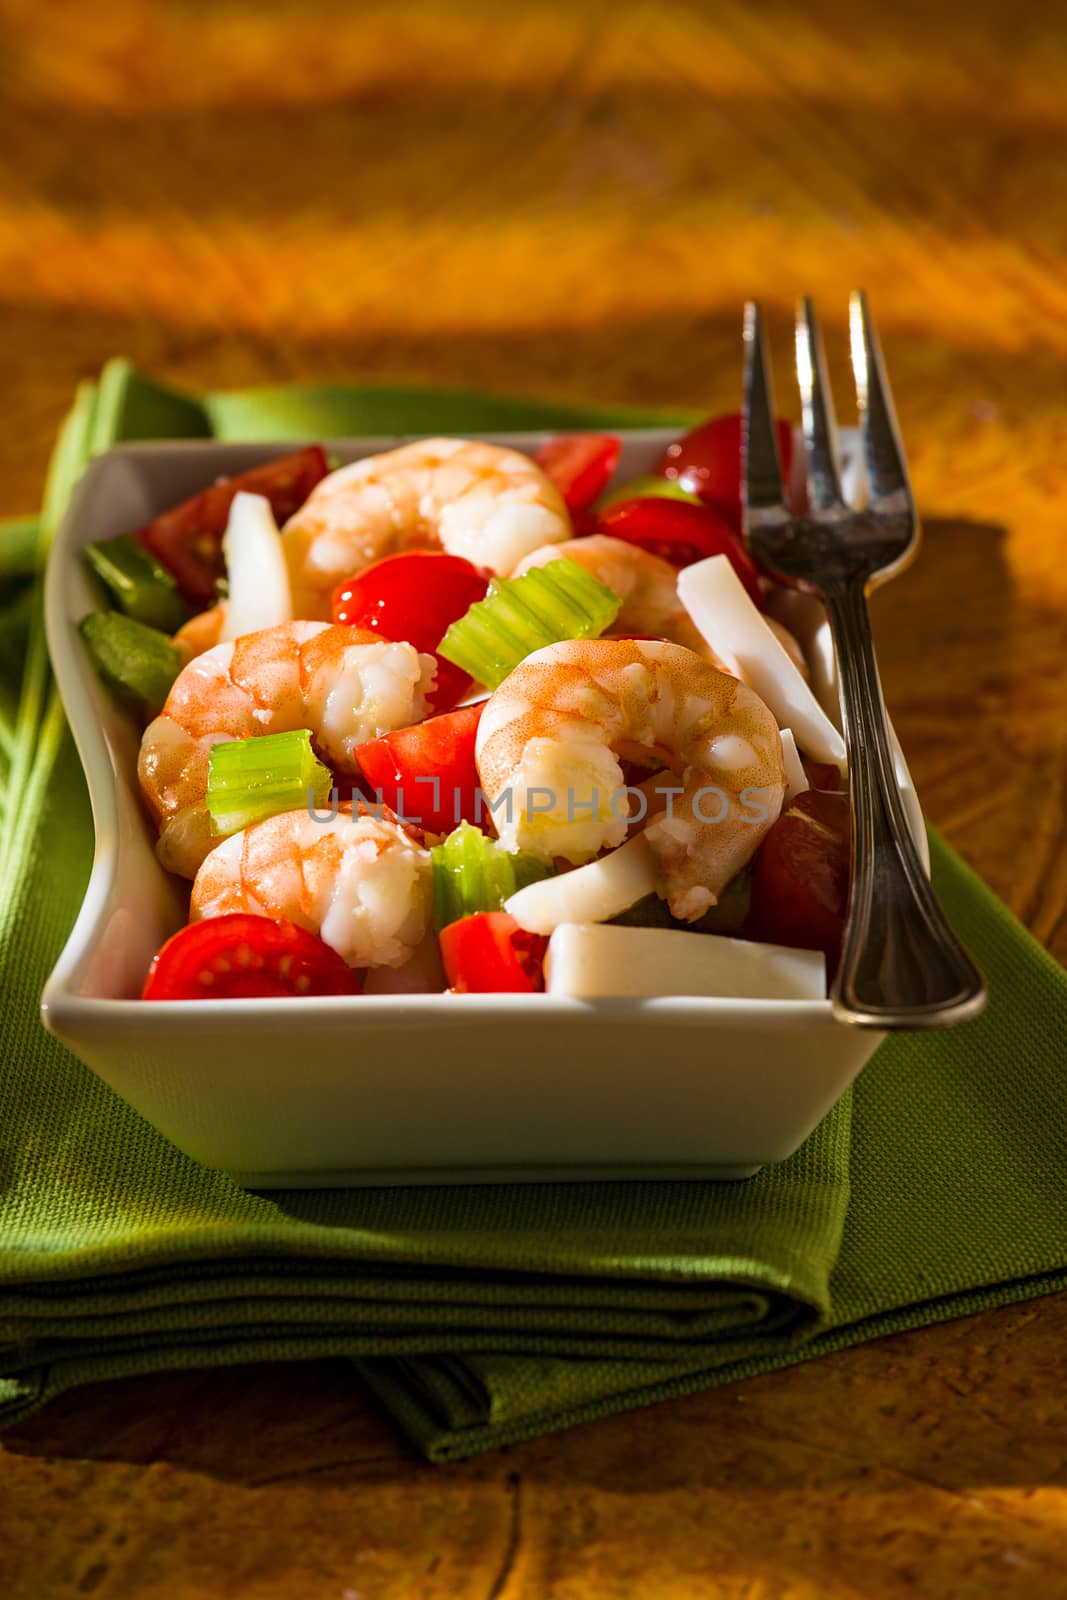 Shrimp salad with squid tomatoes celery inside a white bowl